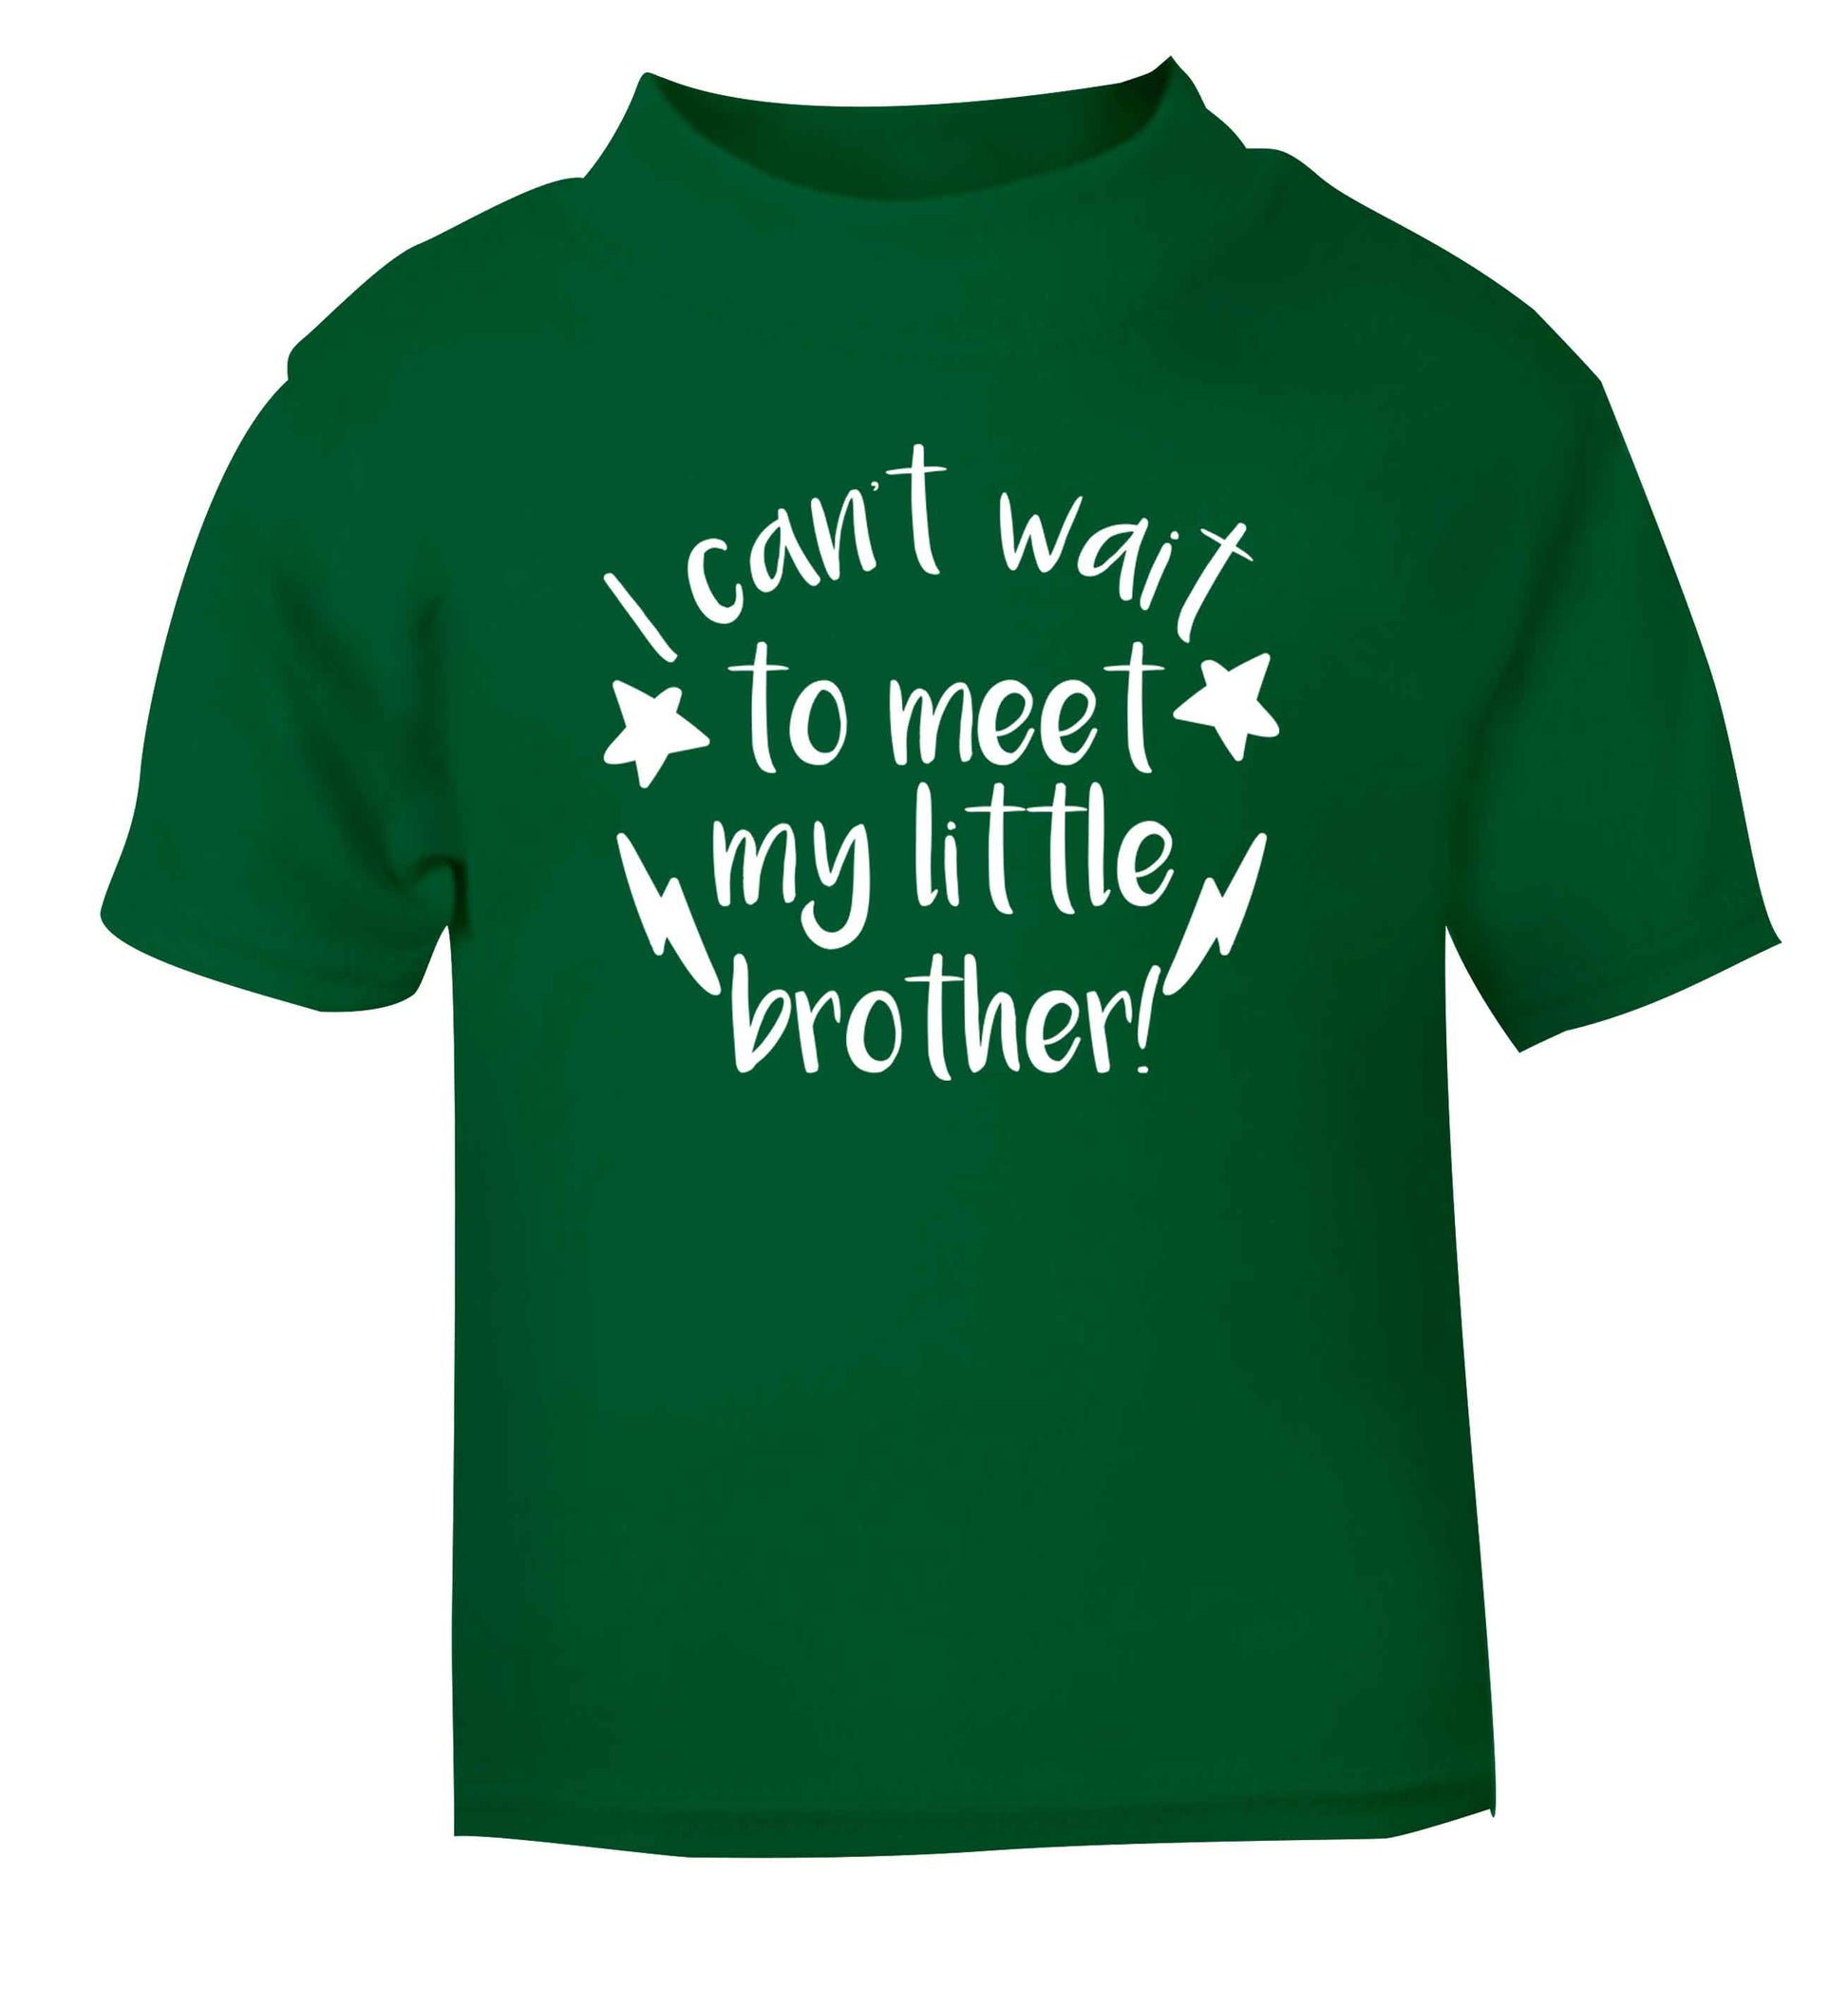 I can't wait to meet my sister! green Baby Toddler Tshirt 2 Years